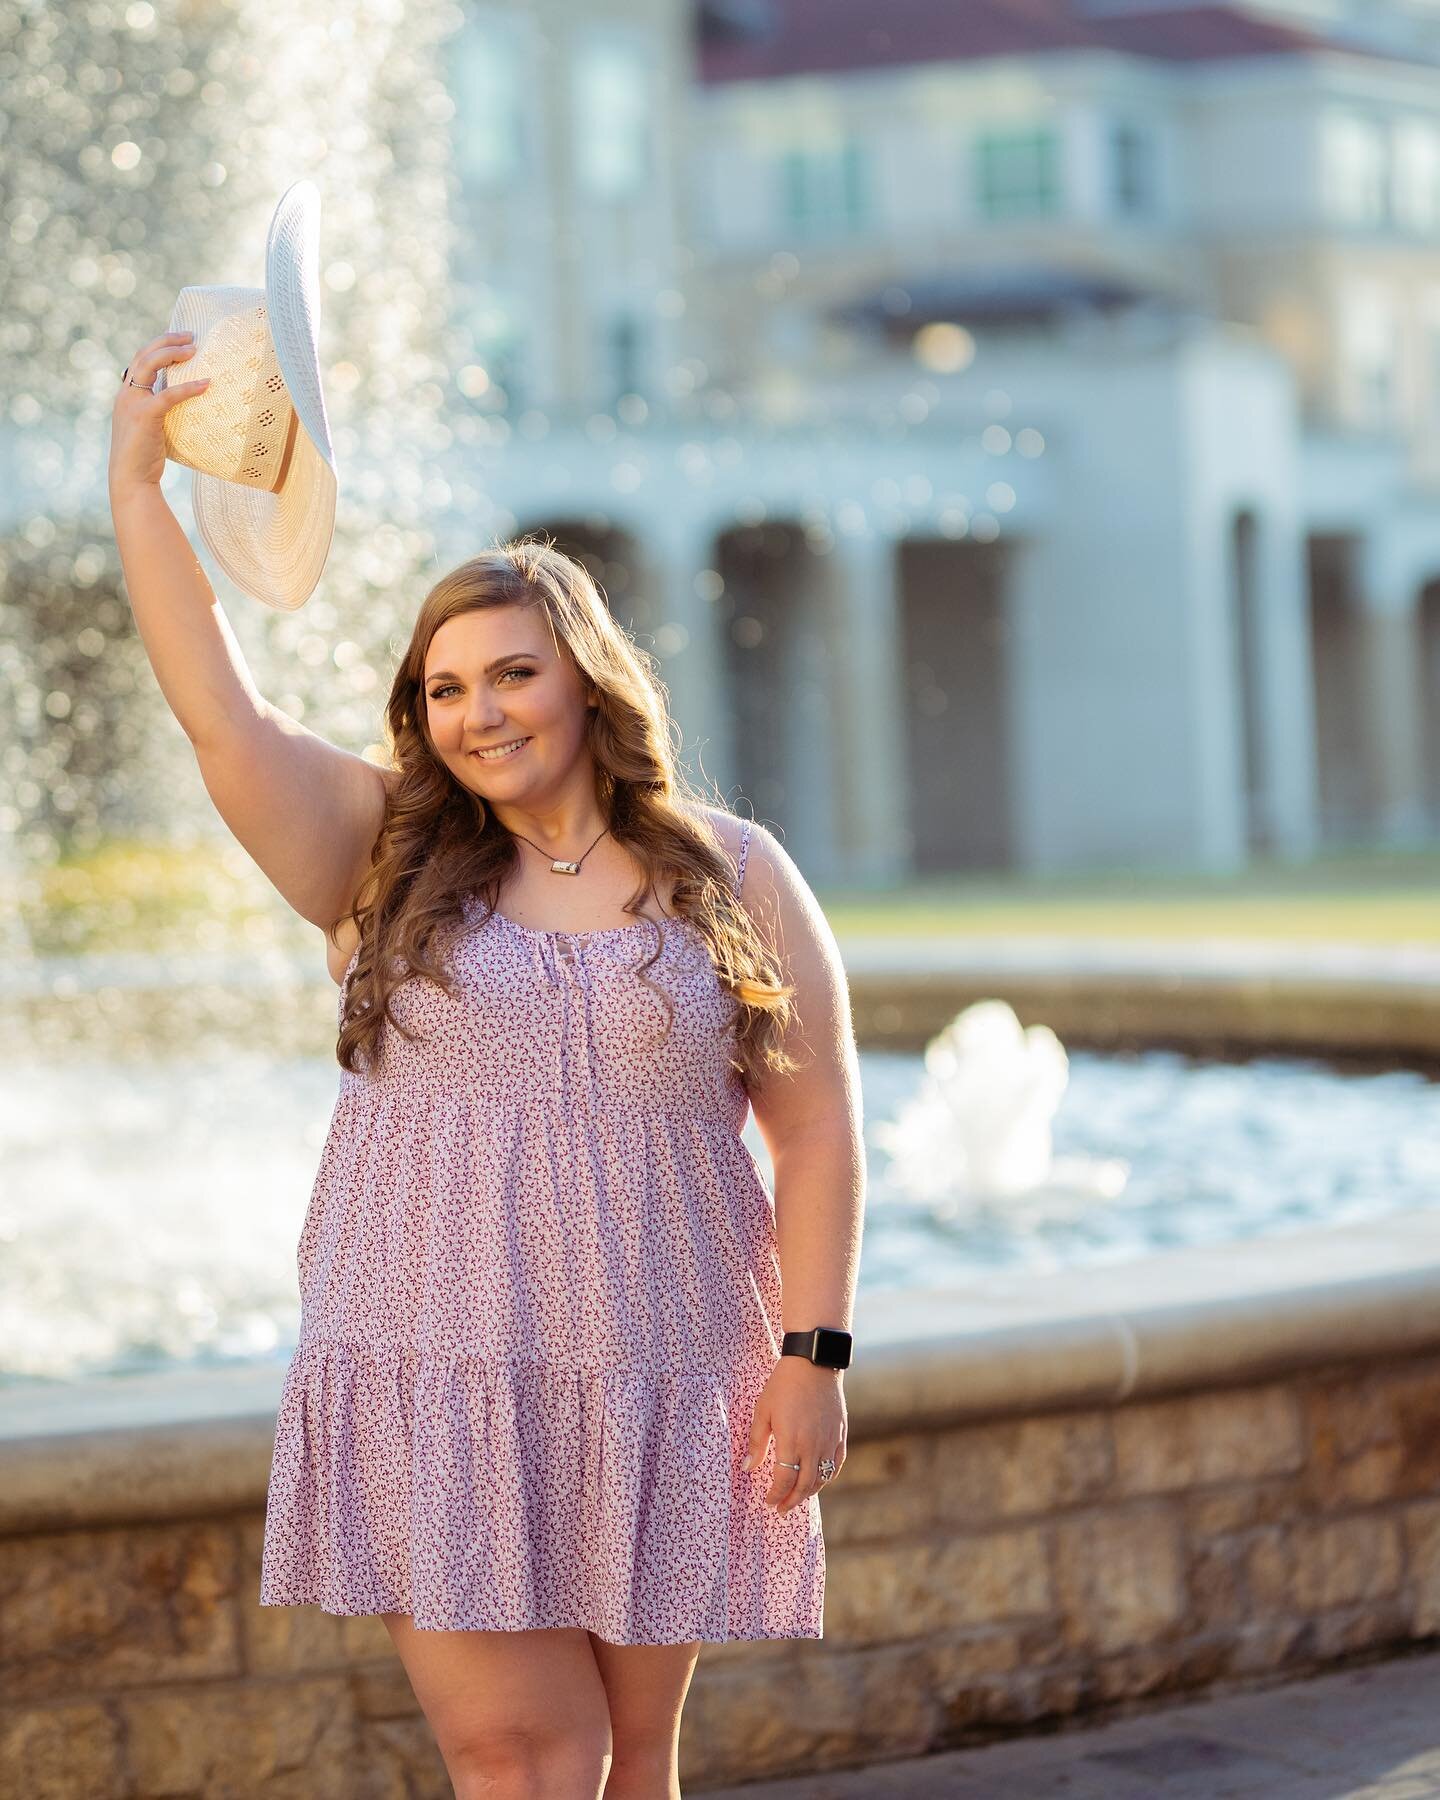 I always get such stunning graduates to photograph. 🤩 Graduation is coming soon and I&rsquo;m so glad I got to help capture this special milestone. 💜 PS: I still love &amp; miss shooting Red Raider graduates, but TCU is a very close second!!